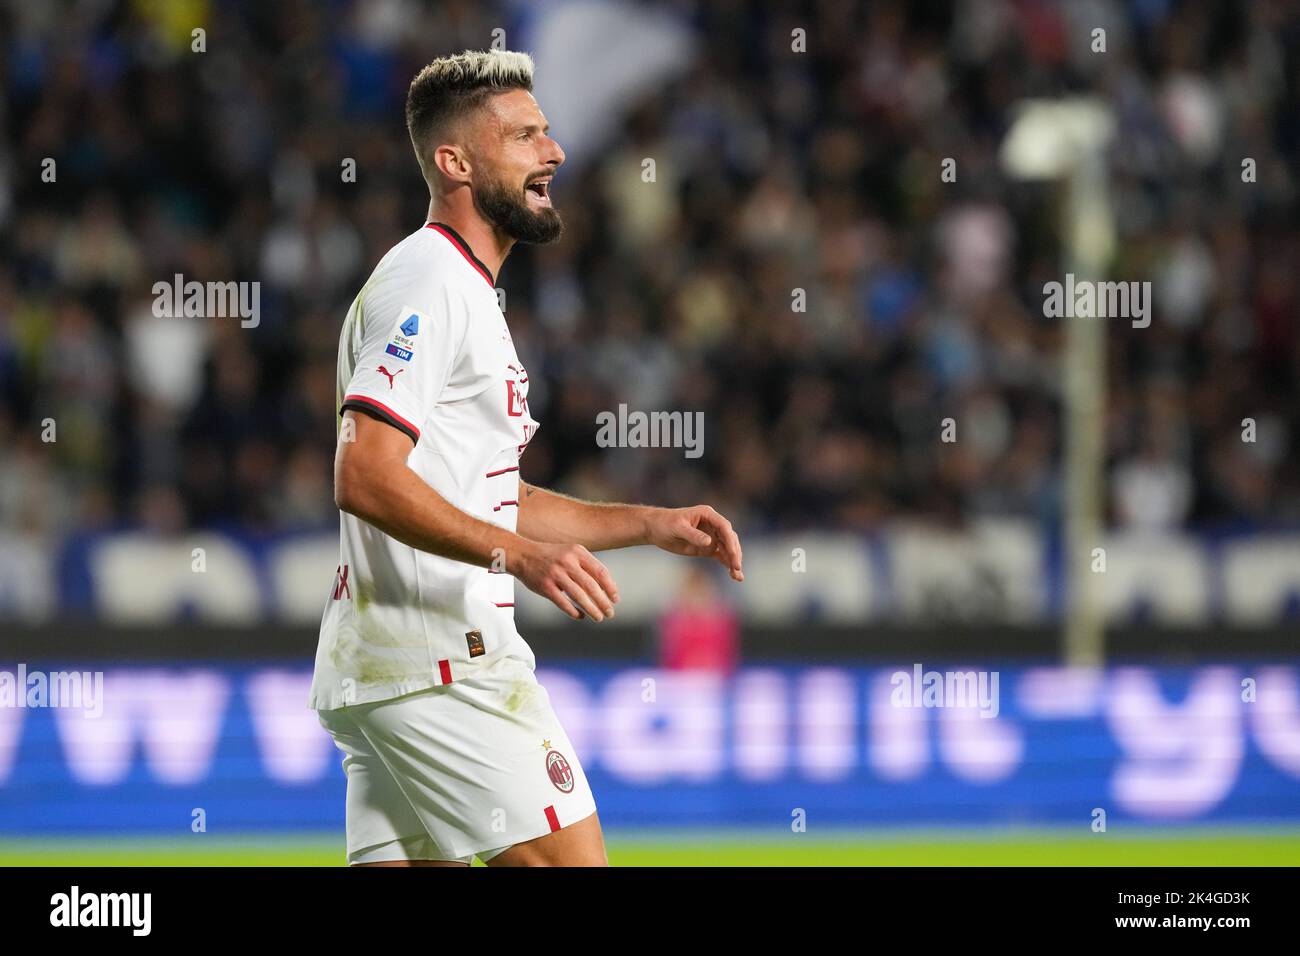 Empoli, Italy. 01st Oct, 2022. Olivier Giroud of AC Milan reacts during the Serie A 2022/2023 football match between Empoli and AC Milan at Castellani stadium in Empoli (Italy), October 1st, 2022. Photo Paolo Nucci/Insidefoto Credit: Insidefoto di andrea staccioli/Alamy Live News Stock Photo